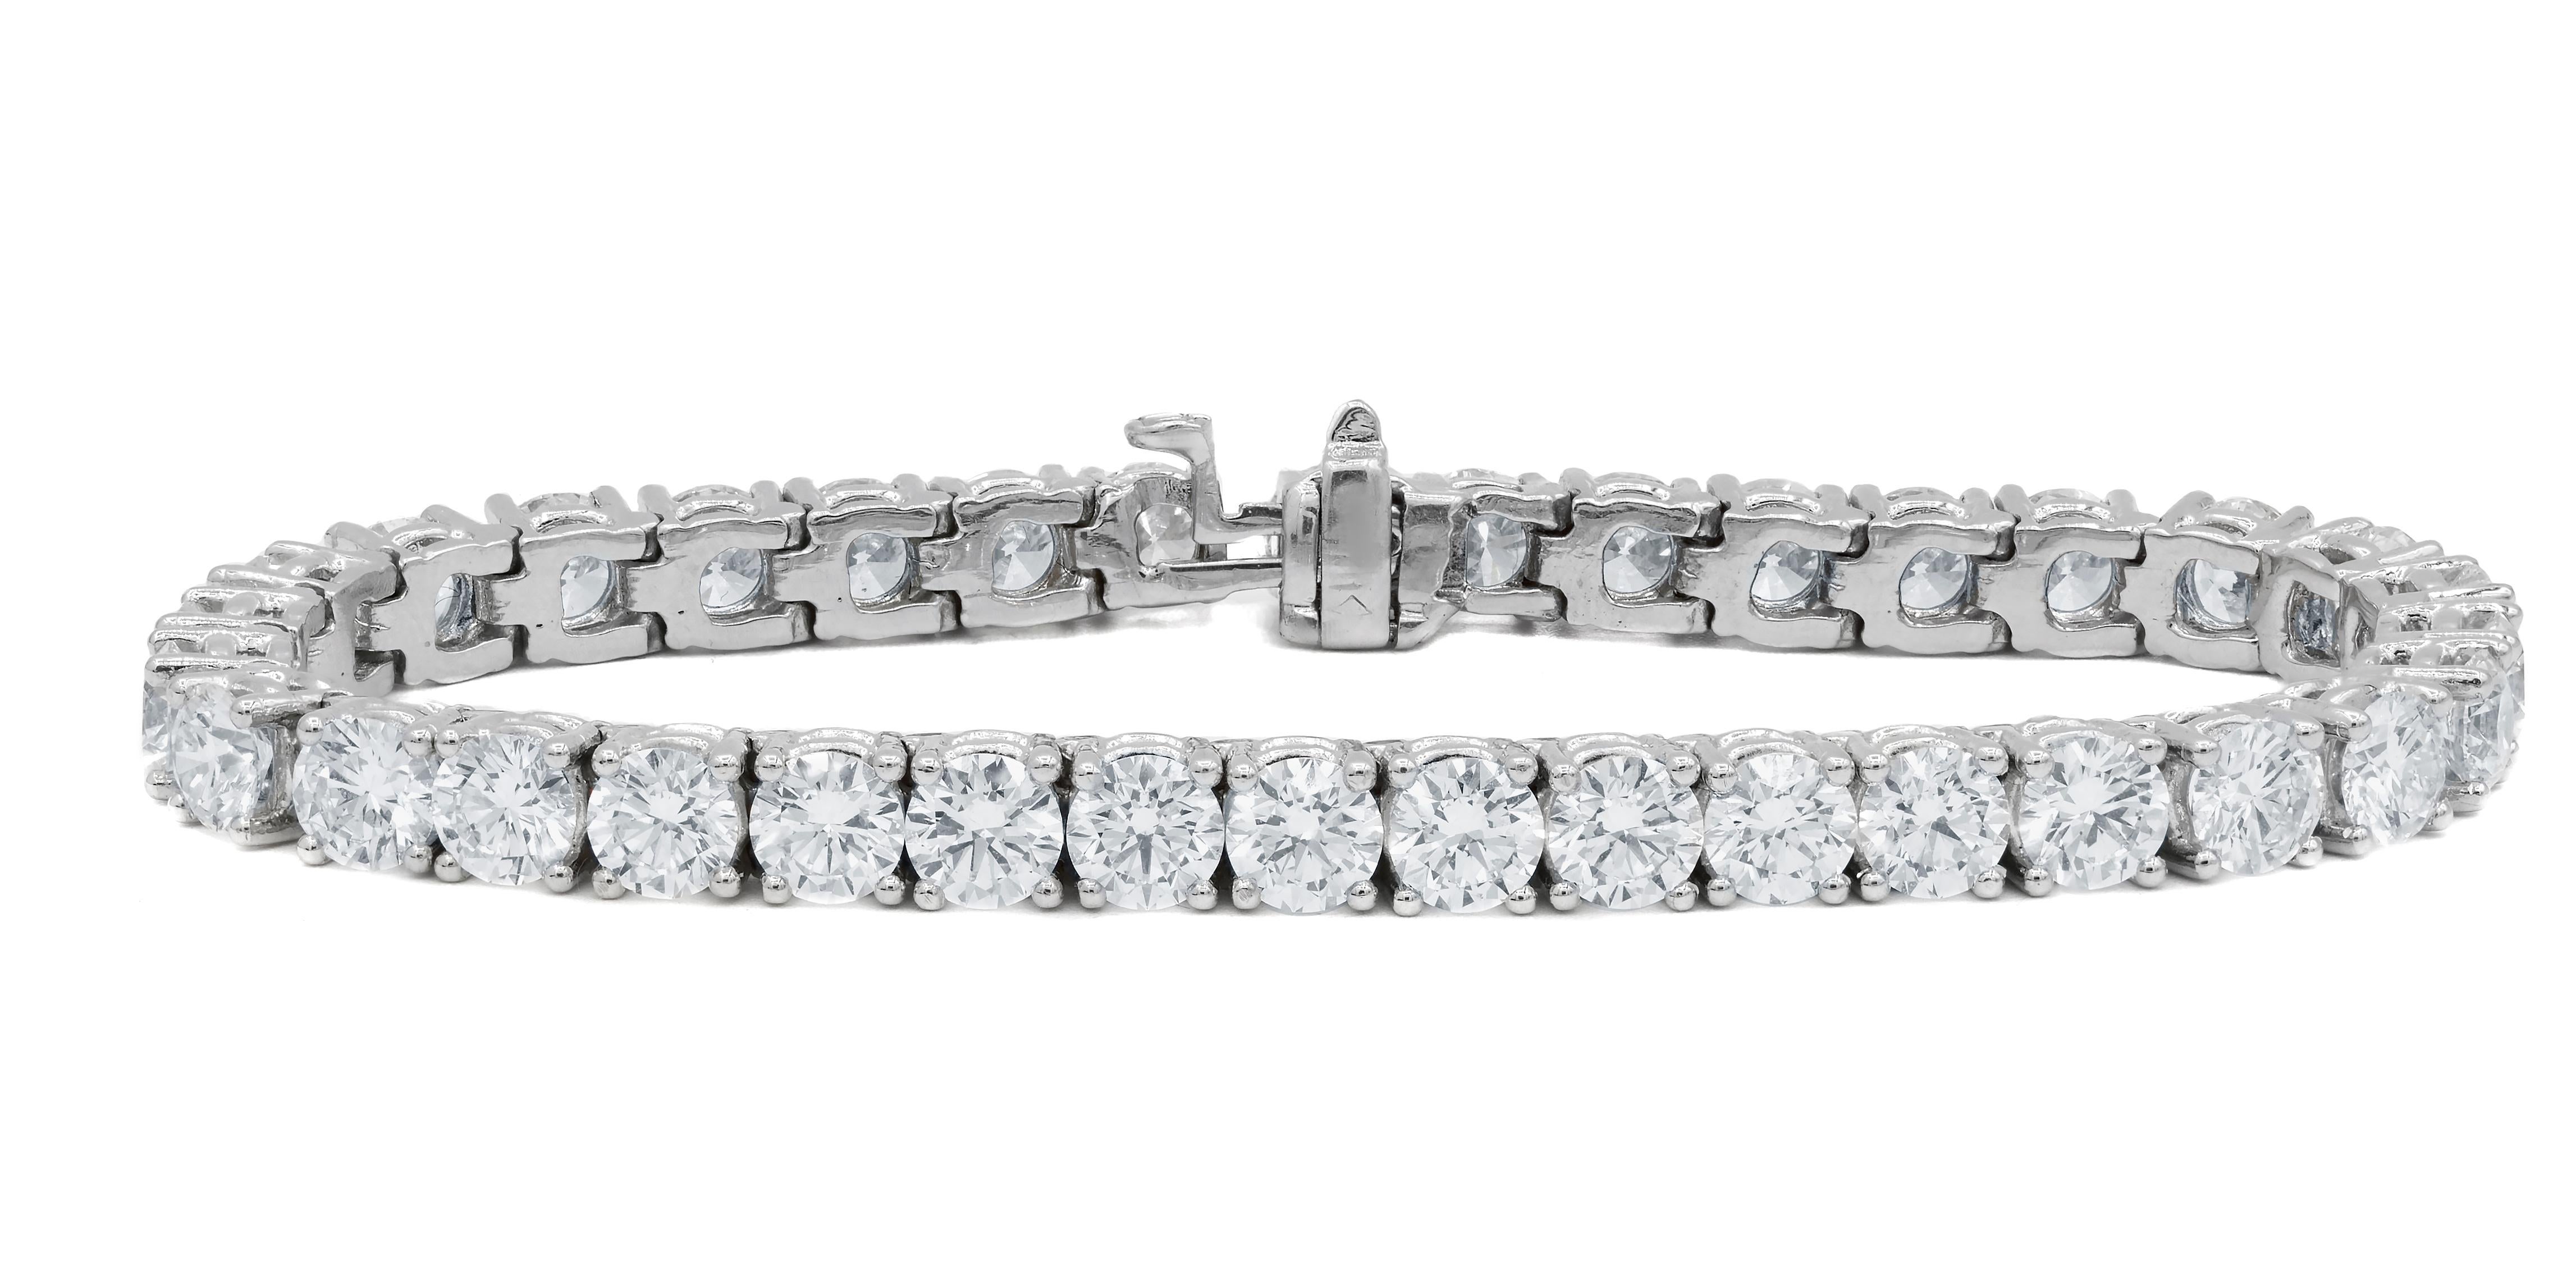 14kt white gold custom tennis bracelet featuring 10.00 cts of round diamonds 38 stones 0.25 each color GH clarity SI. Excellent Cut.
